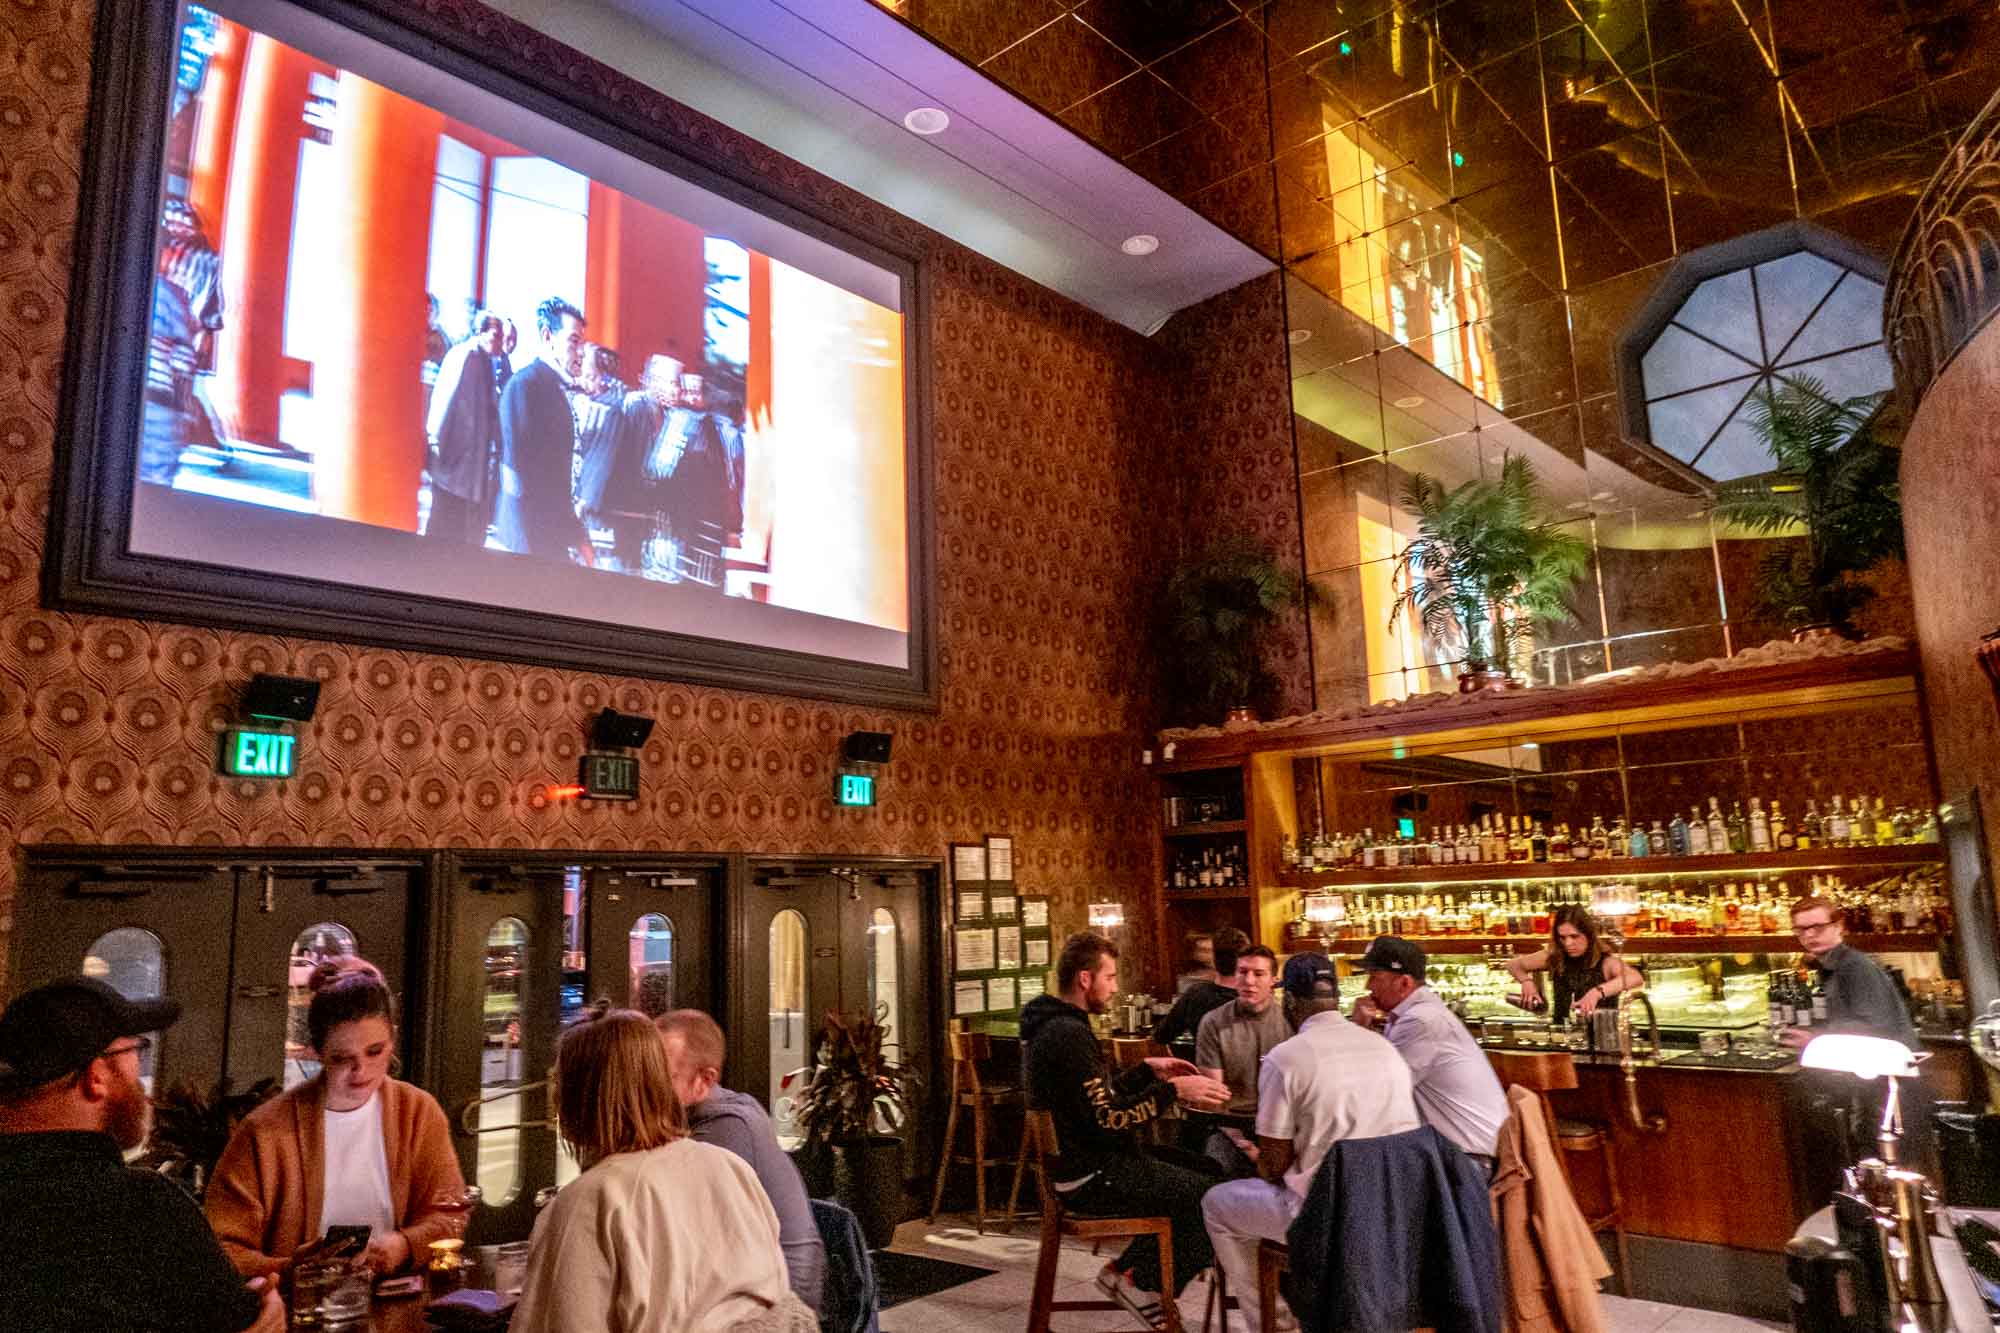 People seated at tables in a bar with a movie projected on the wall